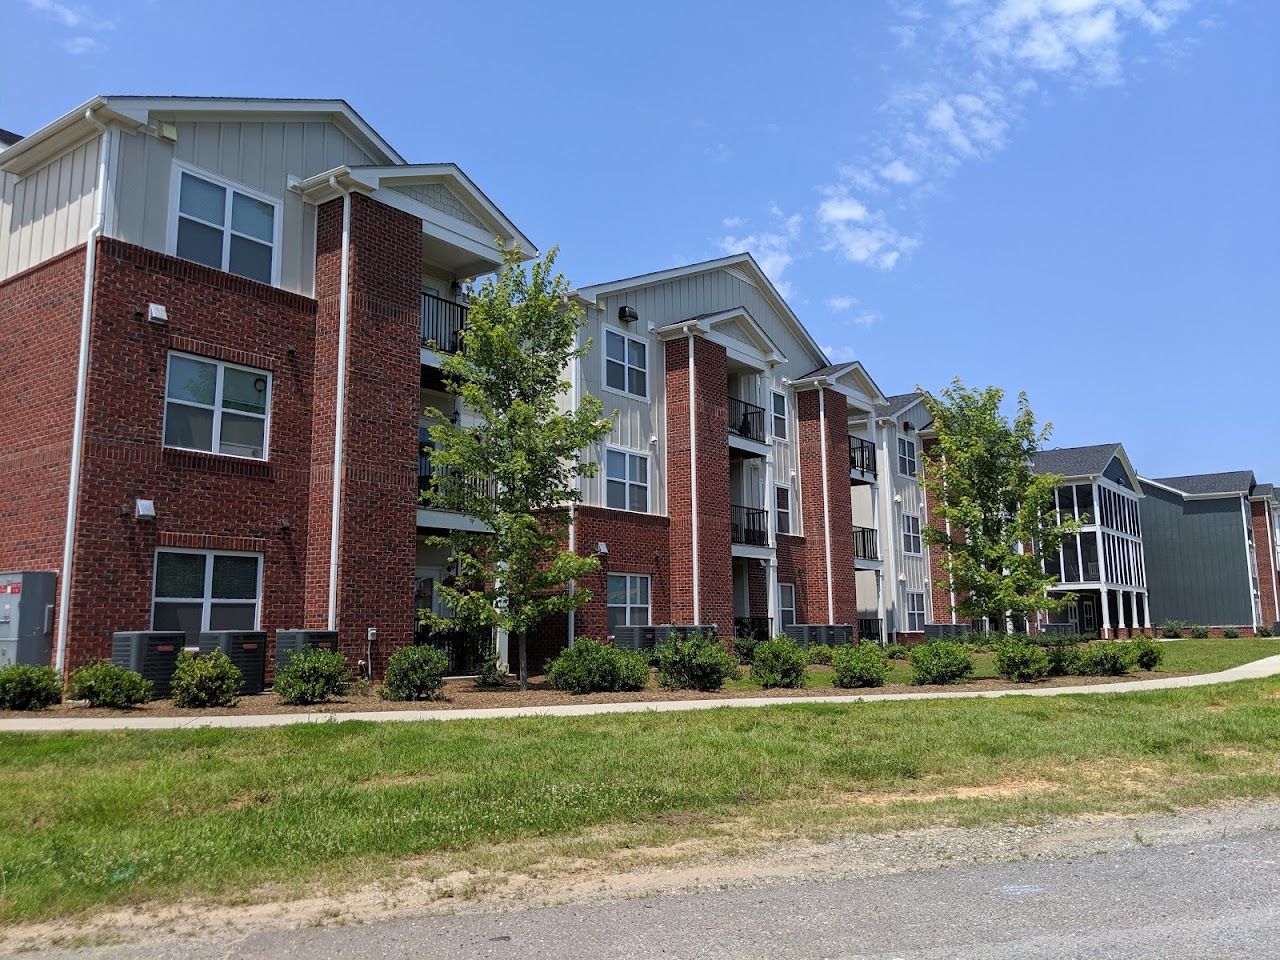 Photo of THE VILLAS AT HICKORY TREE. Affordable housing located at 3305 HICKORY TREE ROAD WINSTON SALEM, NC 27127